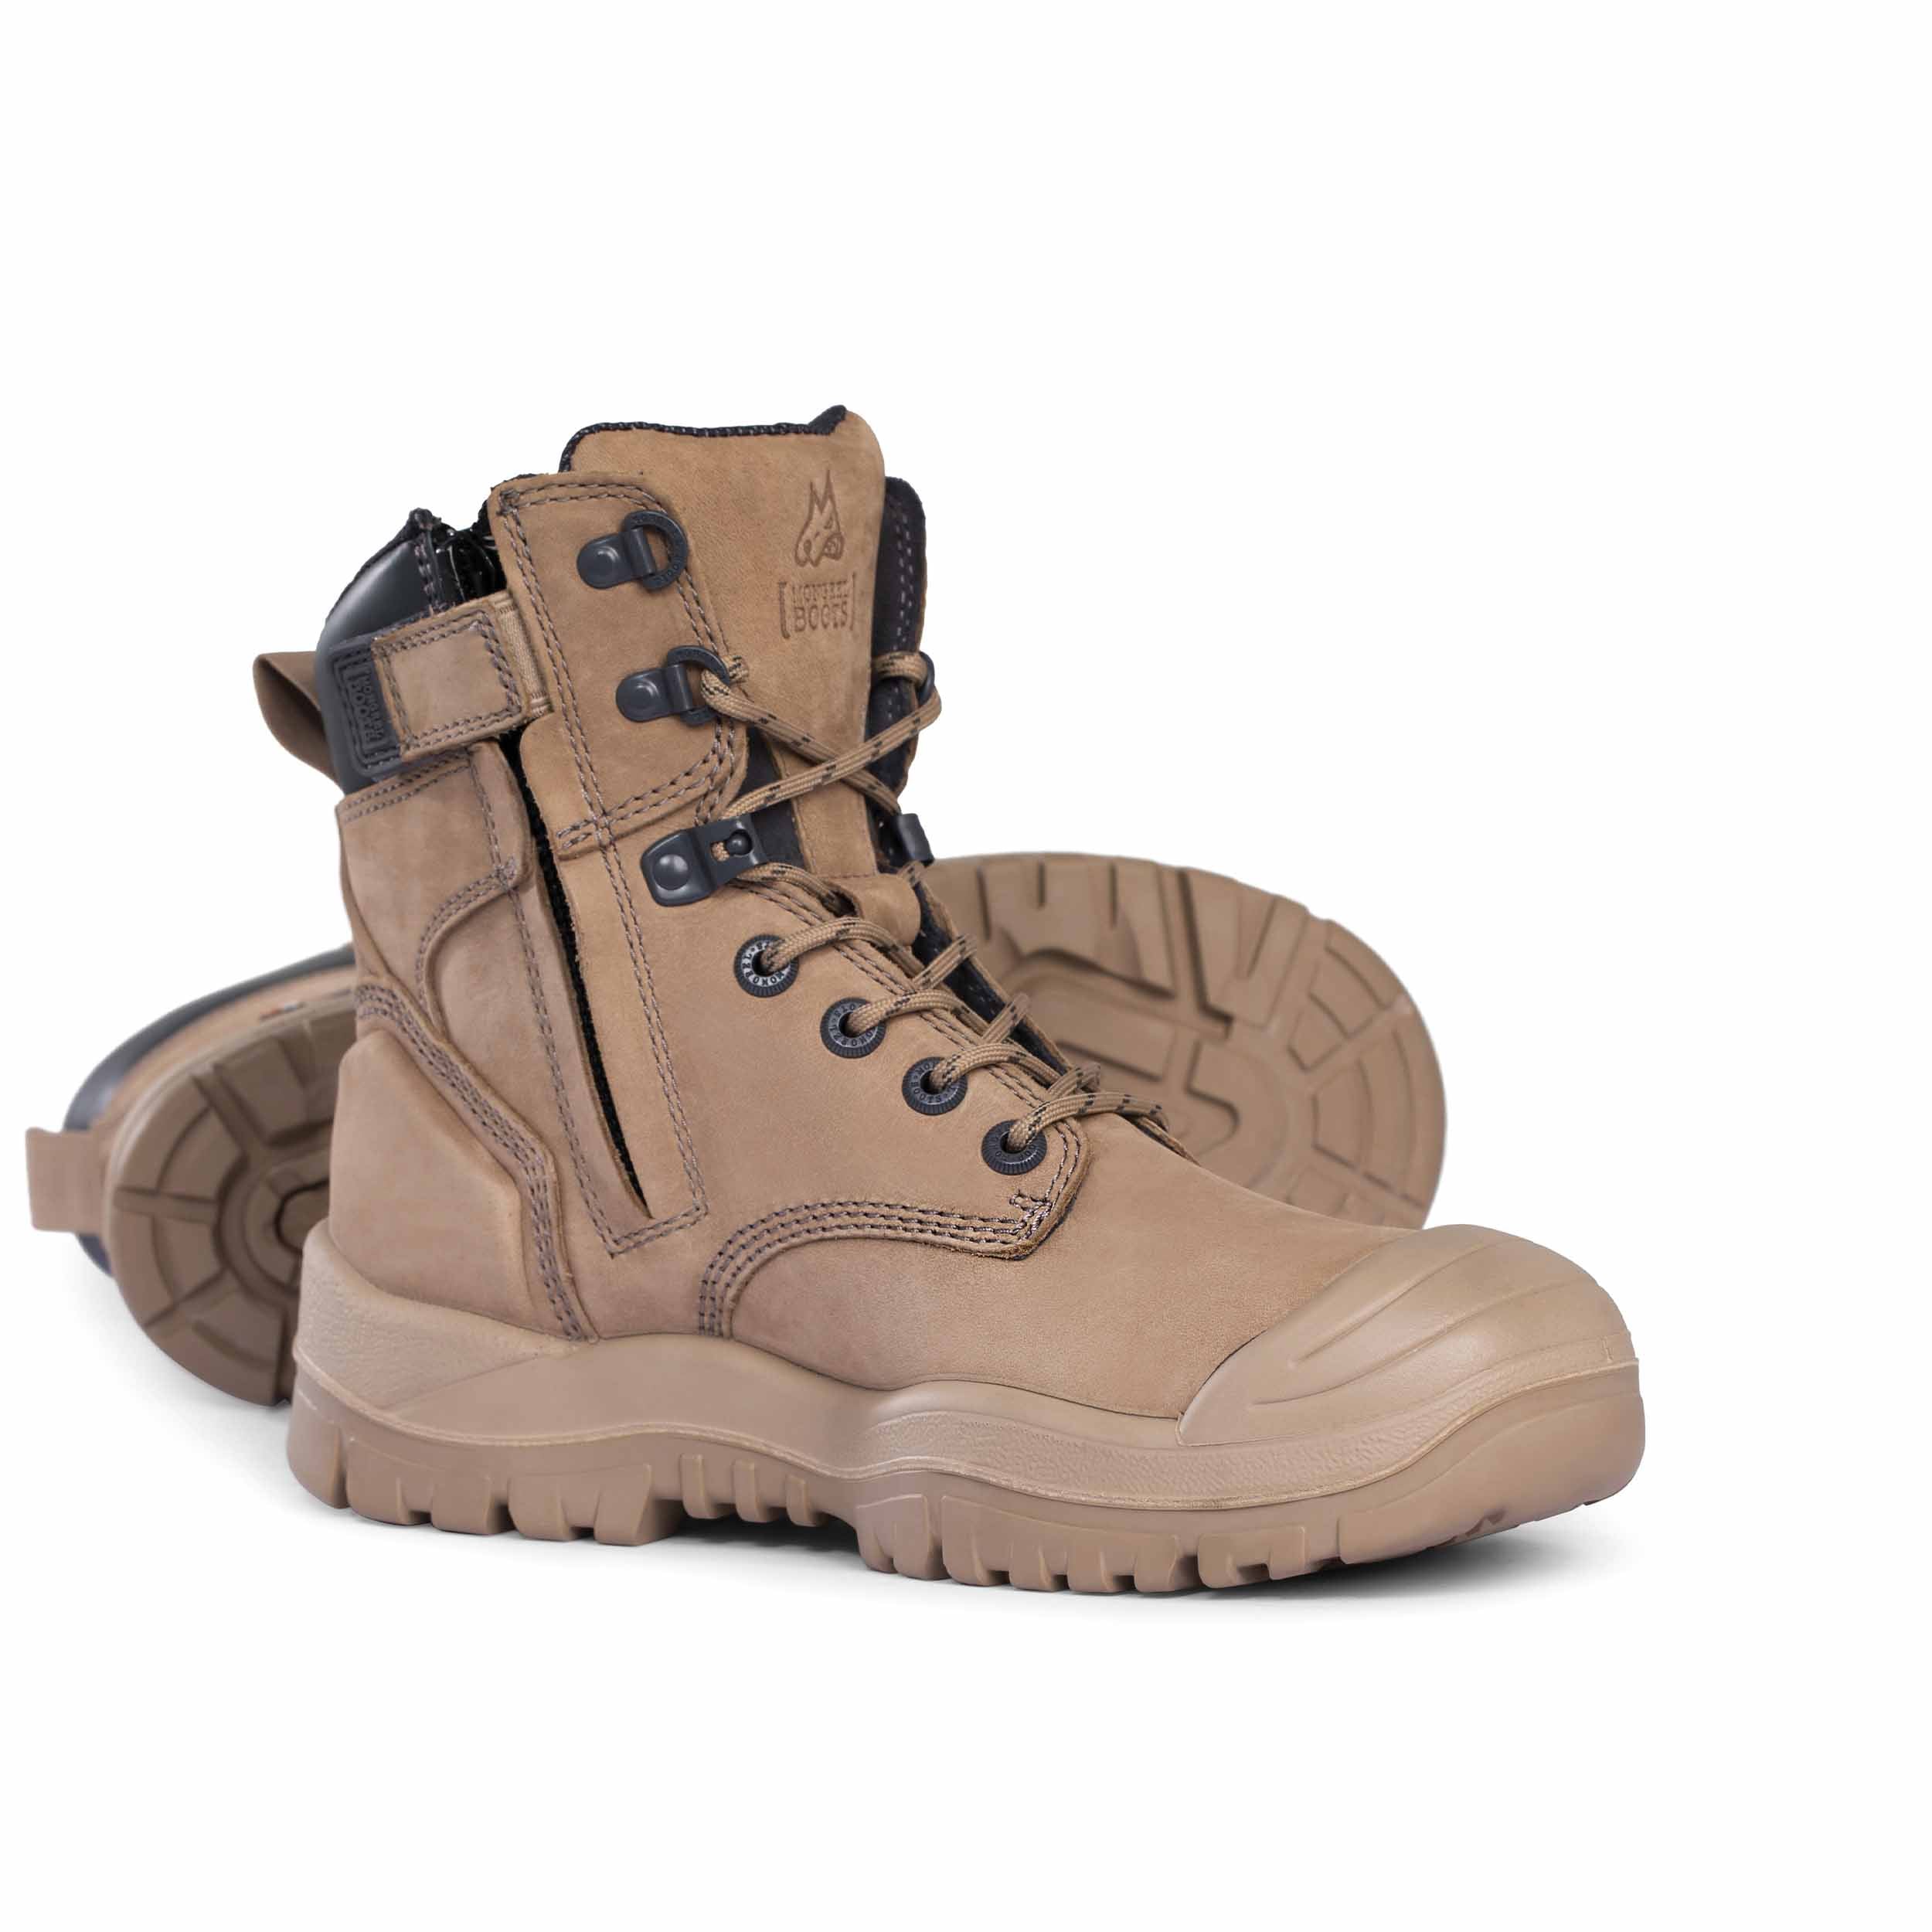 Mongrel Zipsider Stone Boot with Scuff Cap